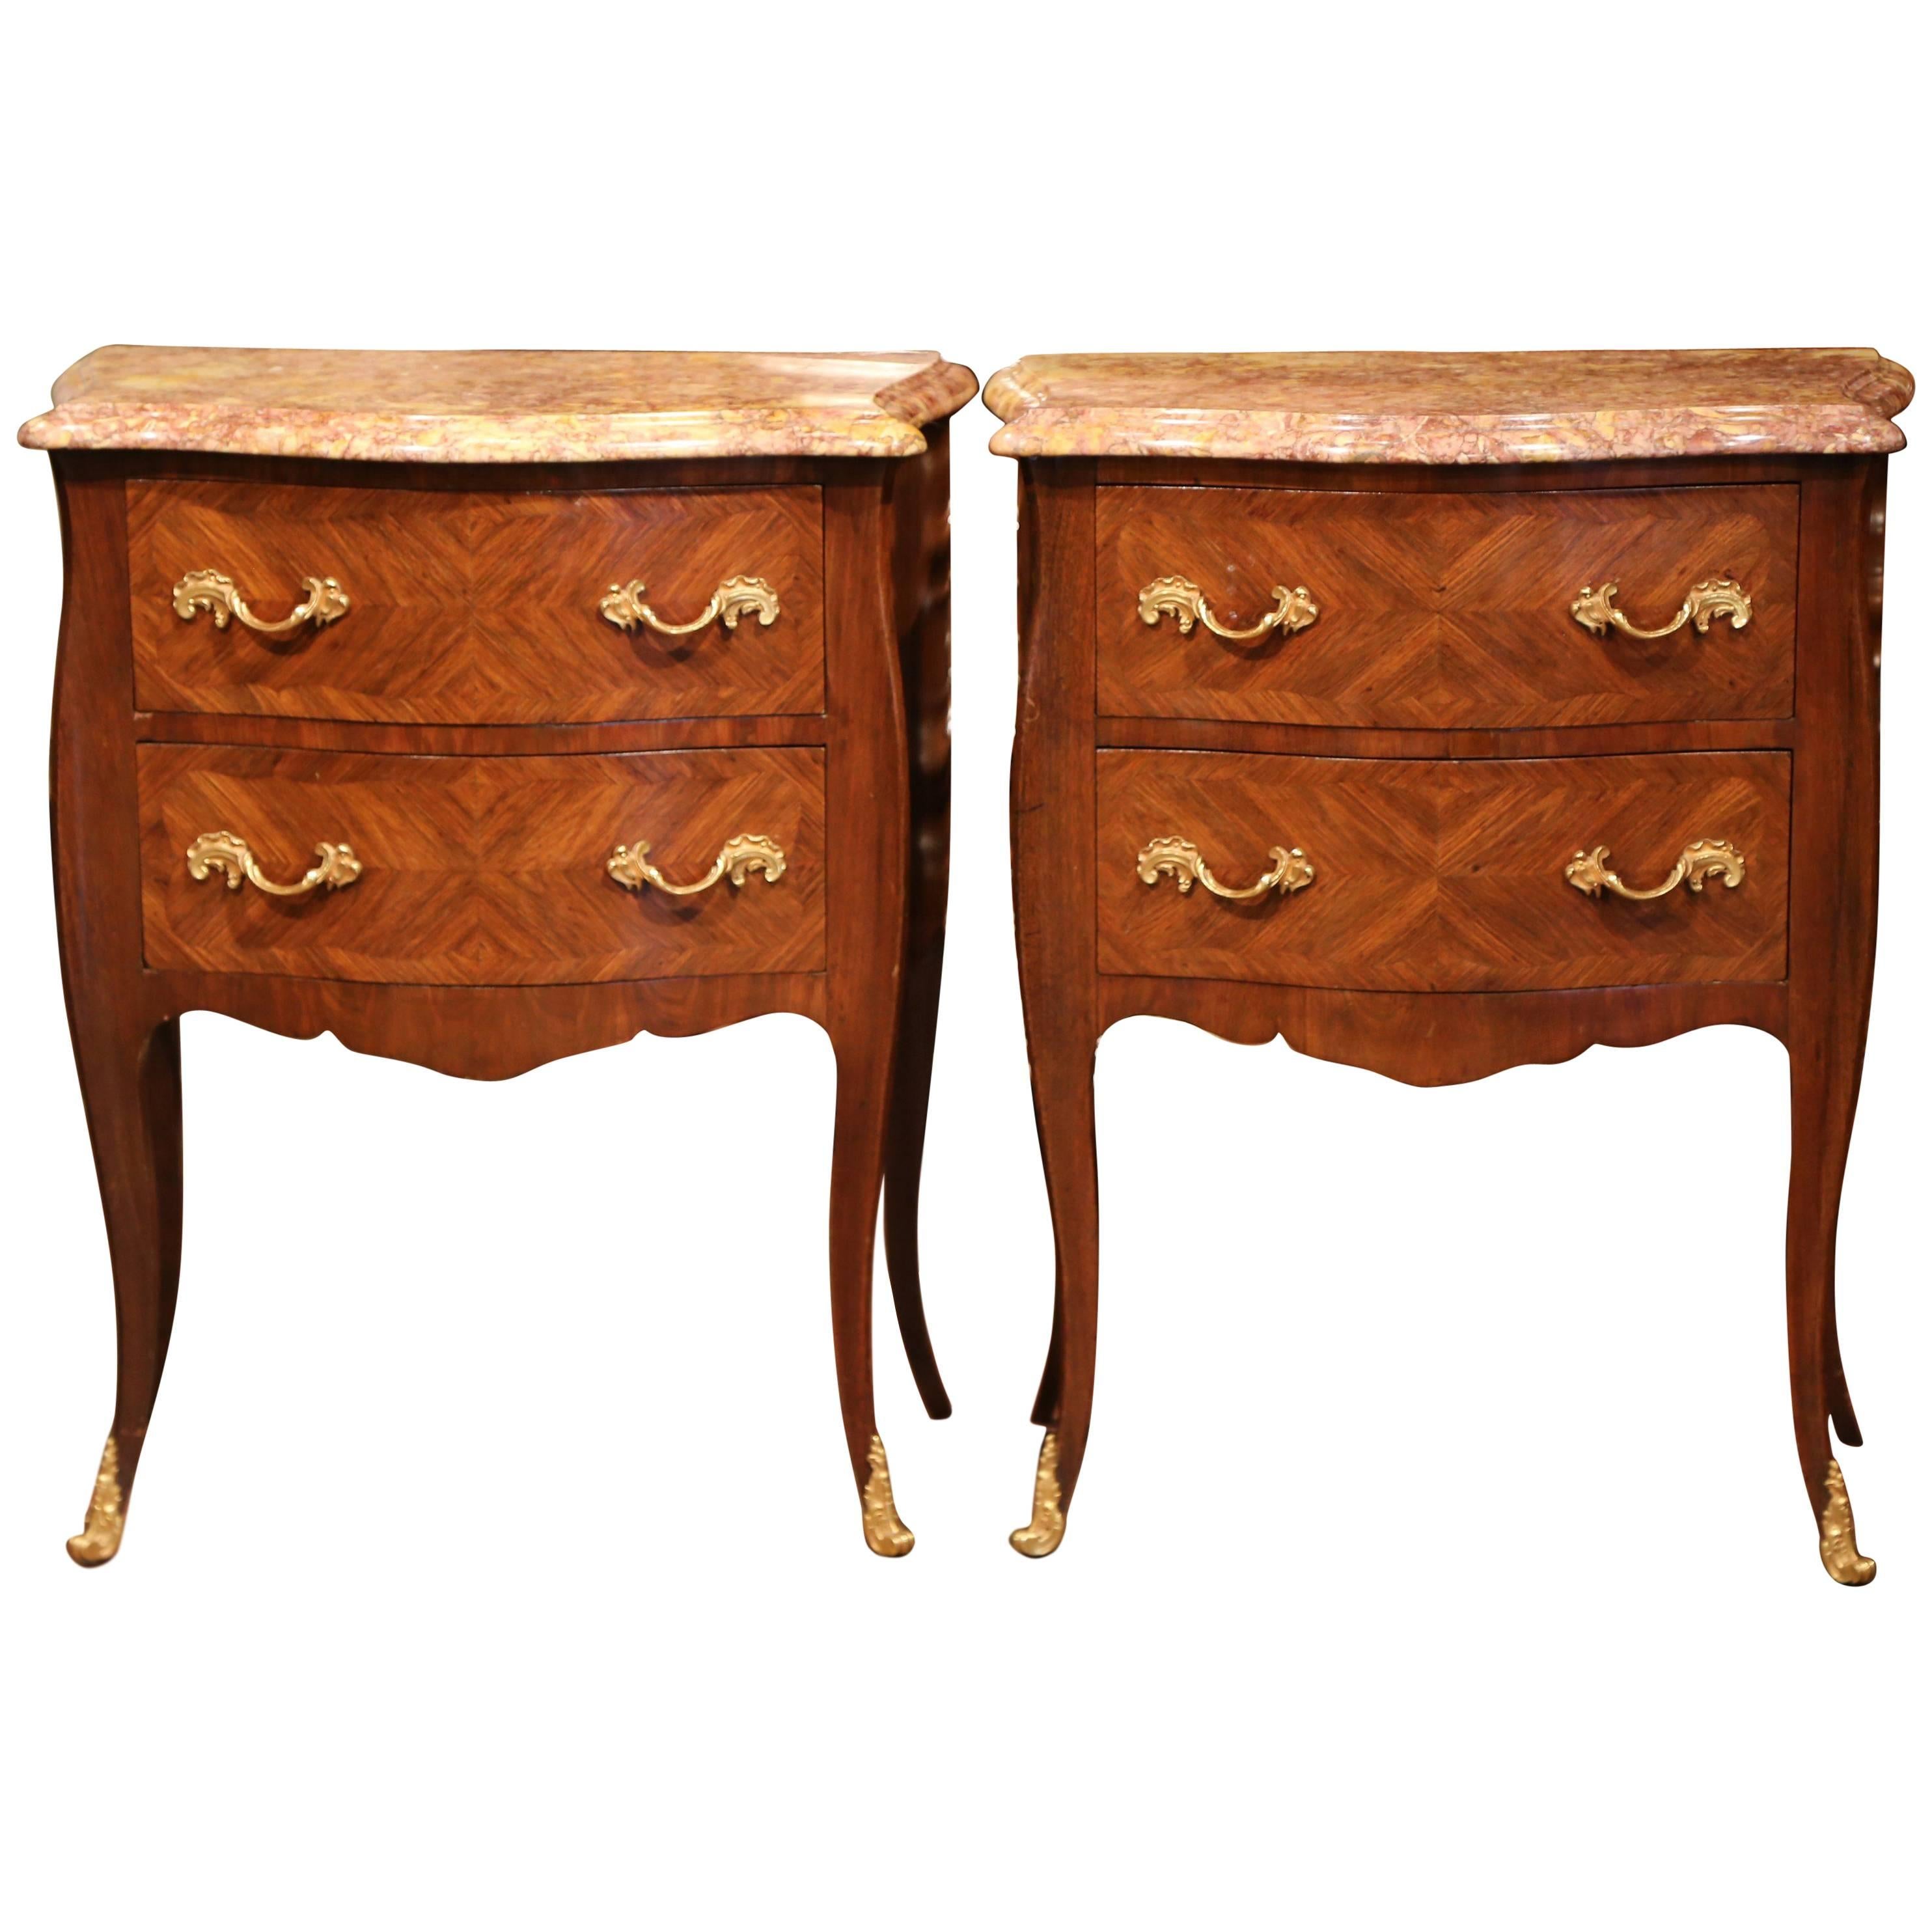 Pair of Early 20th Century Louis XV Bombe Commodes Nightstands with Marble Top